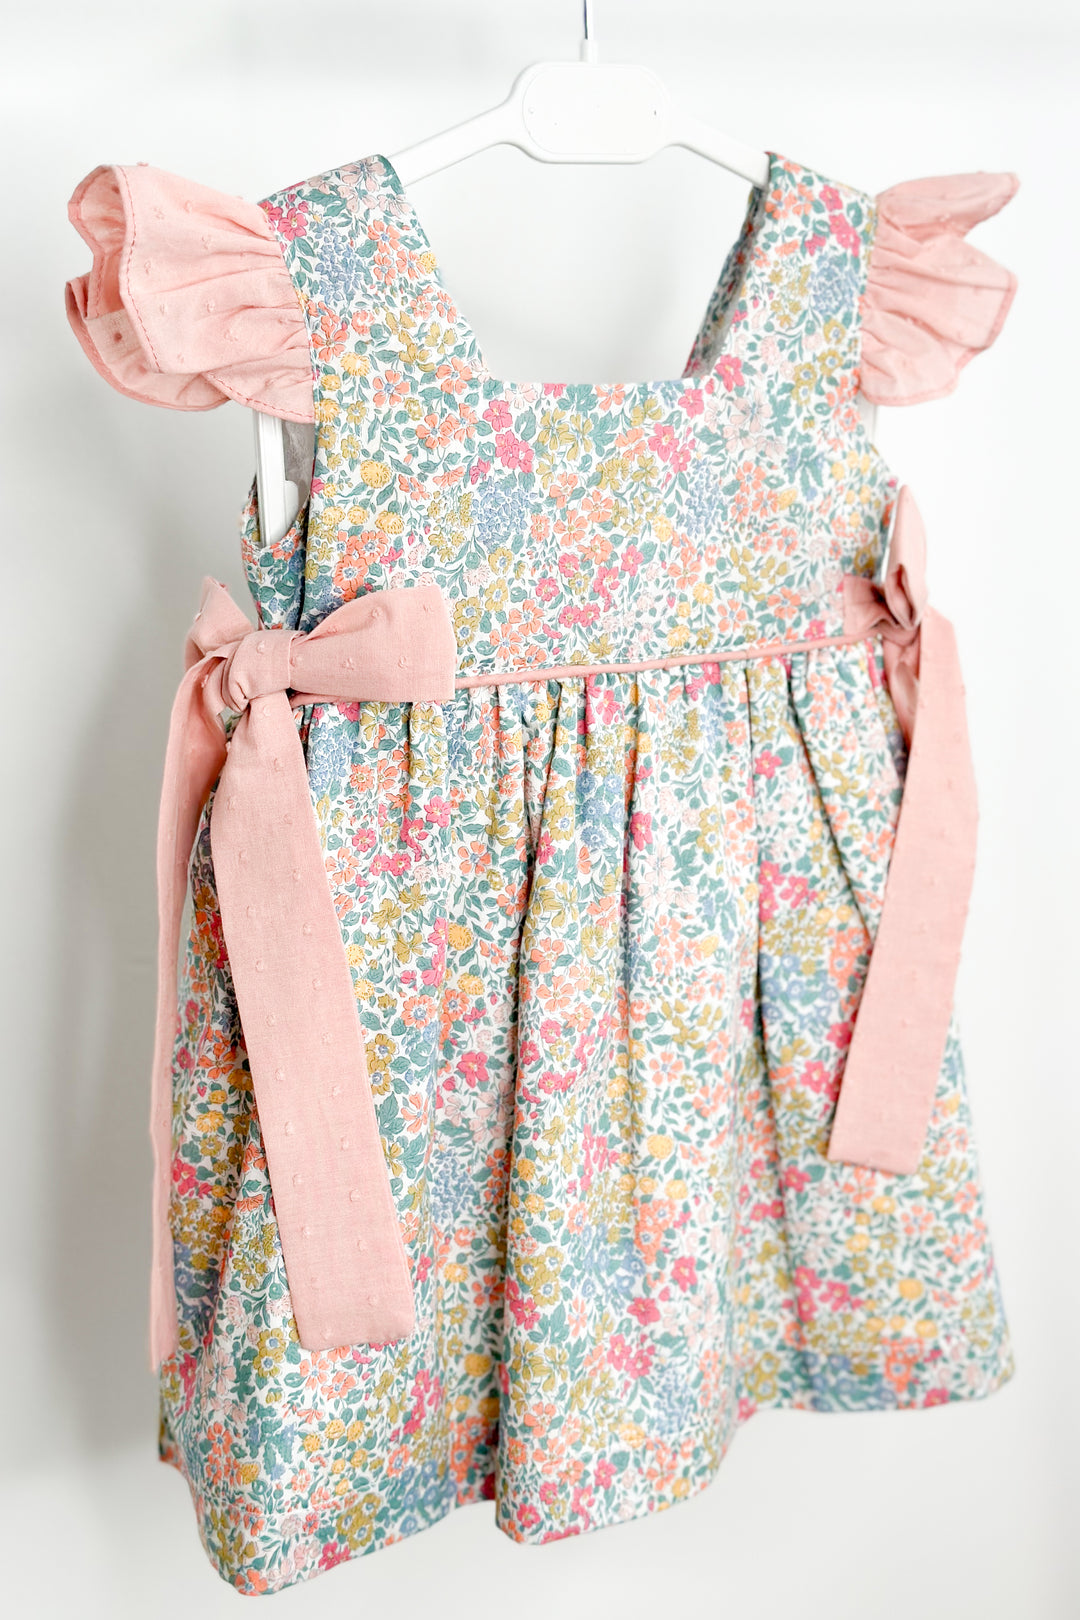 Puro Mimo "Joanna" Green & Pale Rose Floral Dress | Millie and John